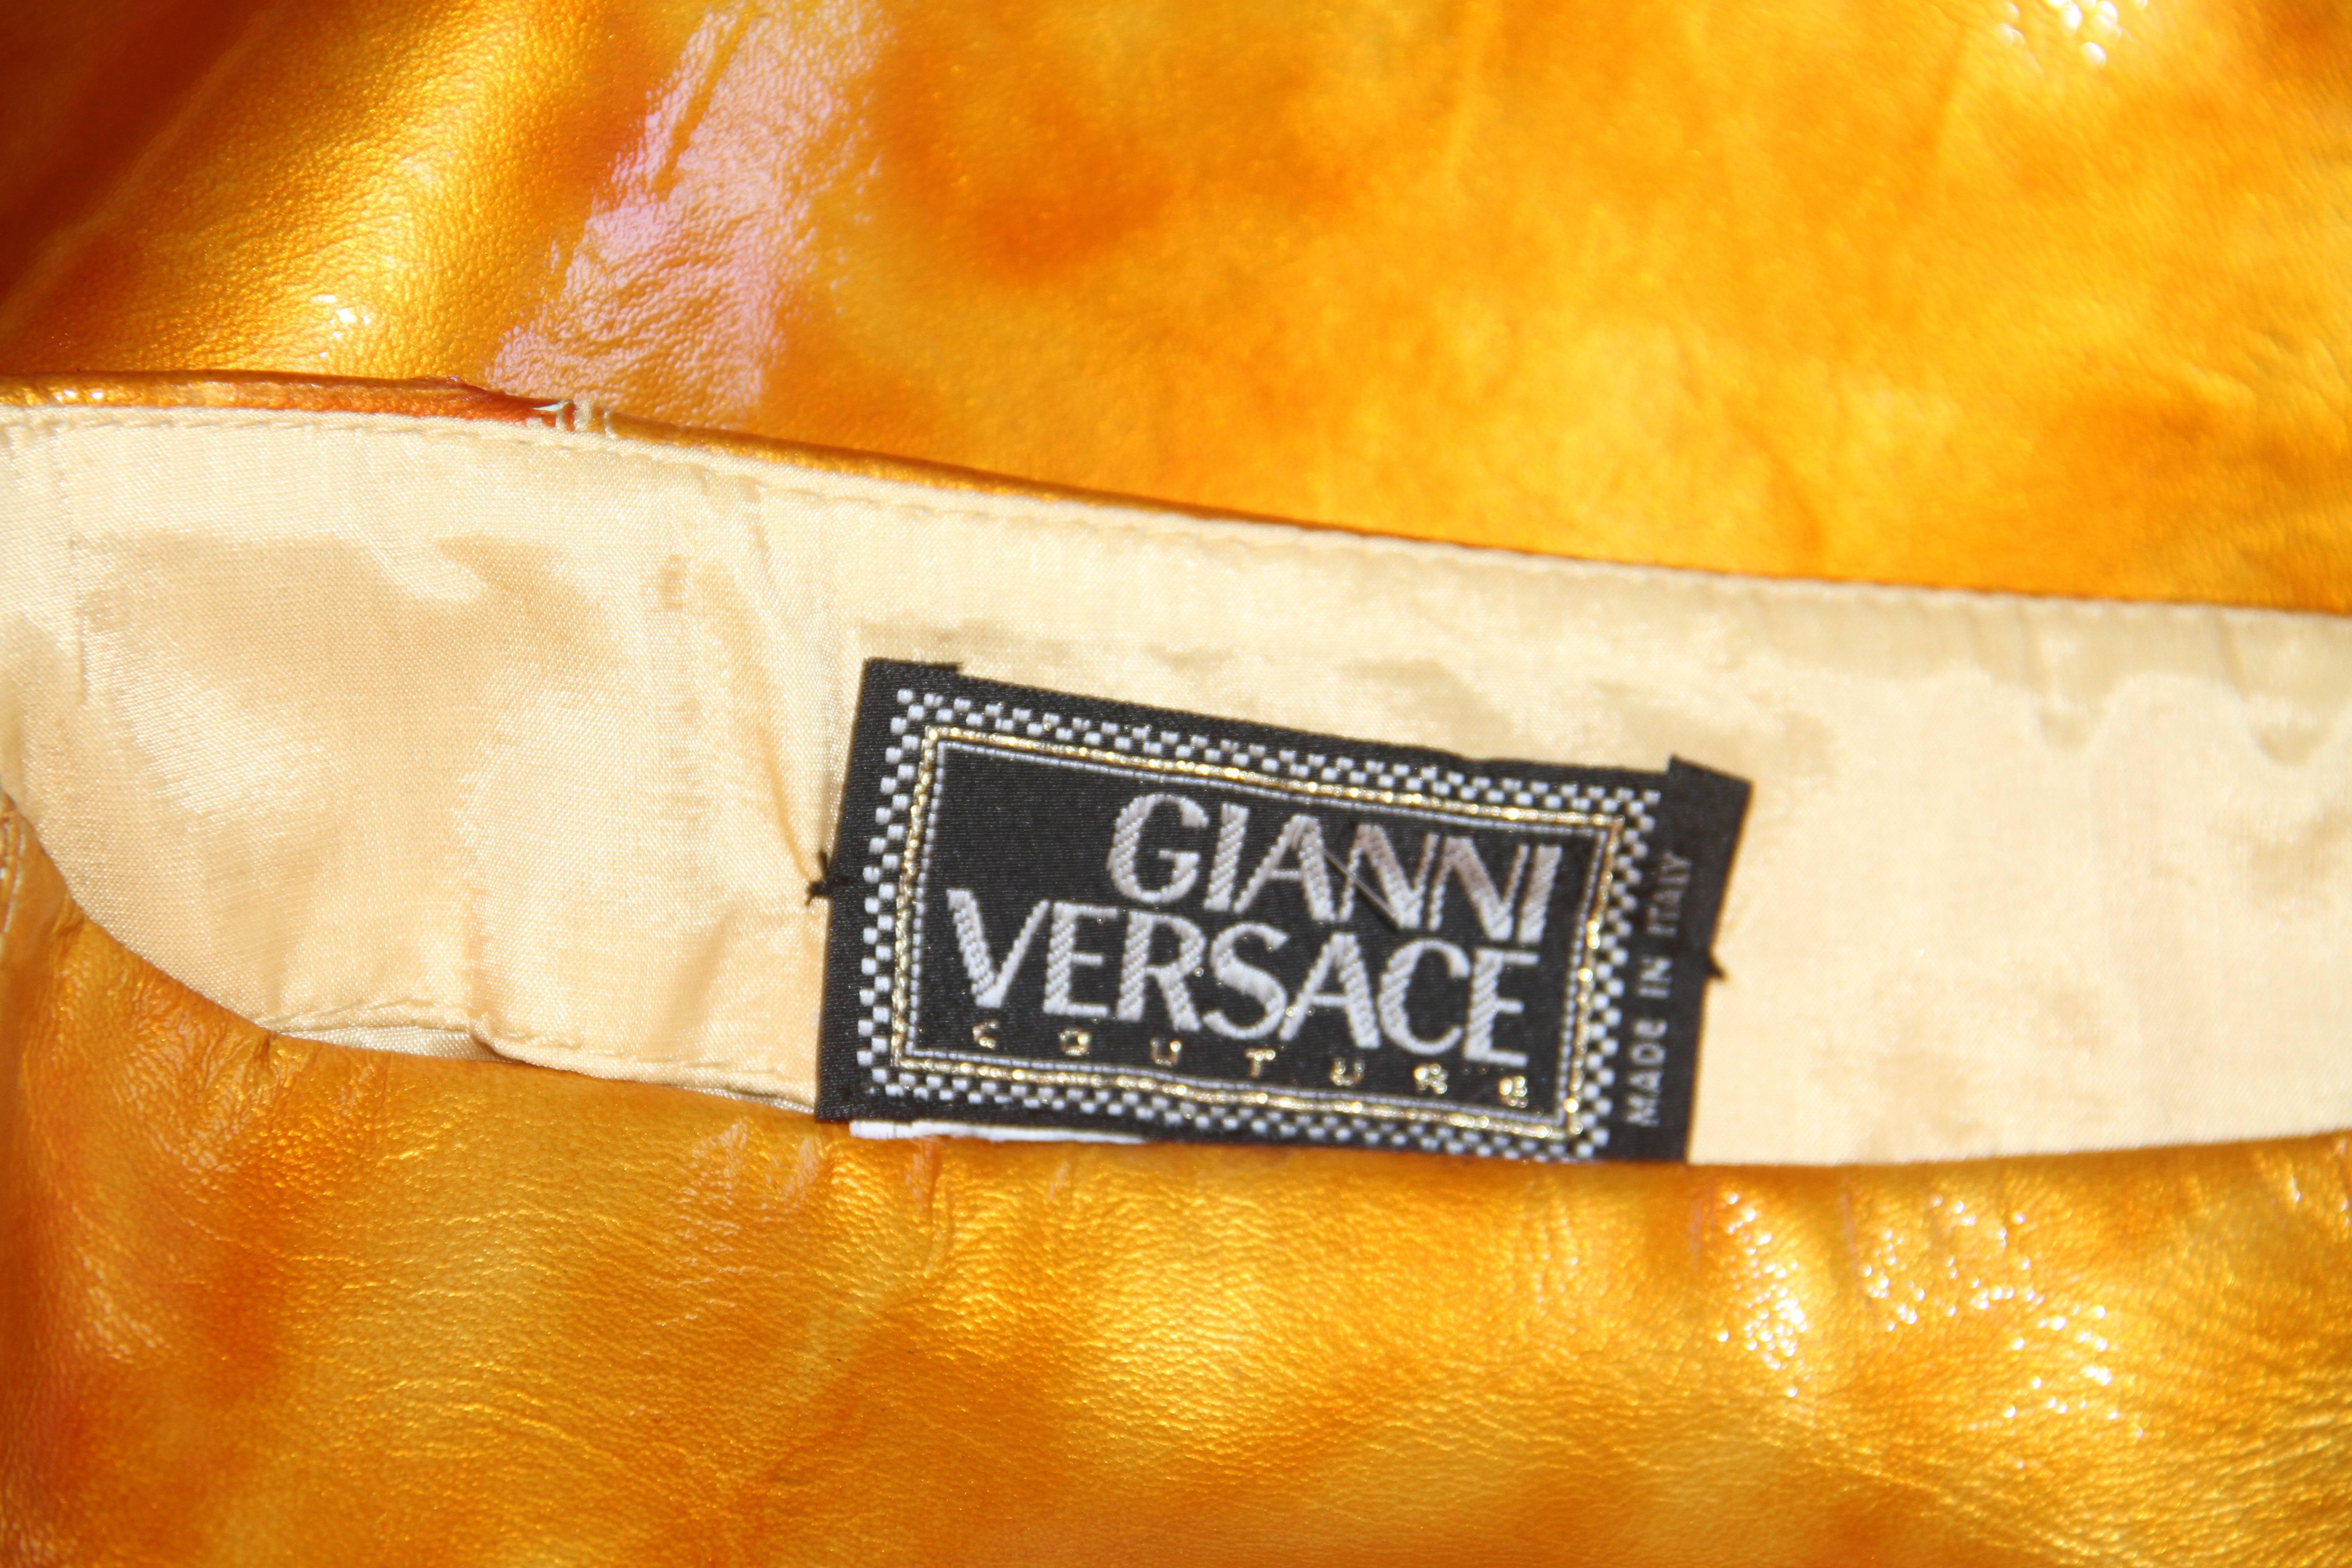 Gianni Versace leather skirt from the Fall 1995 collection.

Unmarked, however, sizing is equivalent to an Italian size 40.

Manufacturer - Ruffo S.p.a.